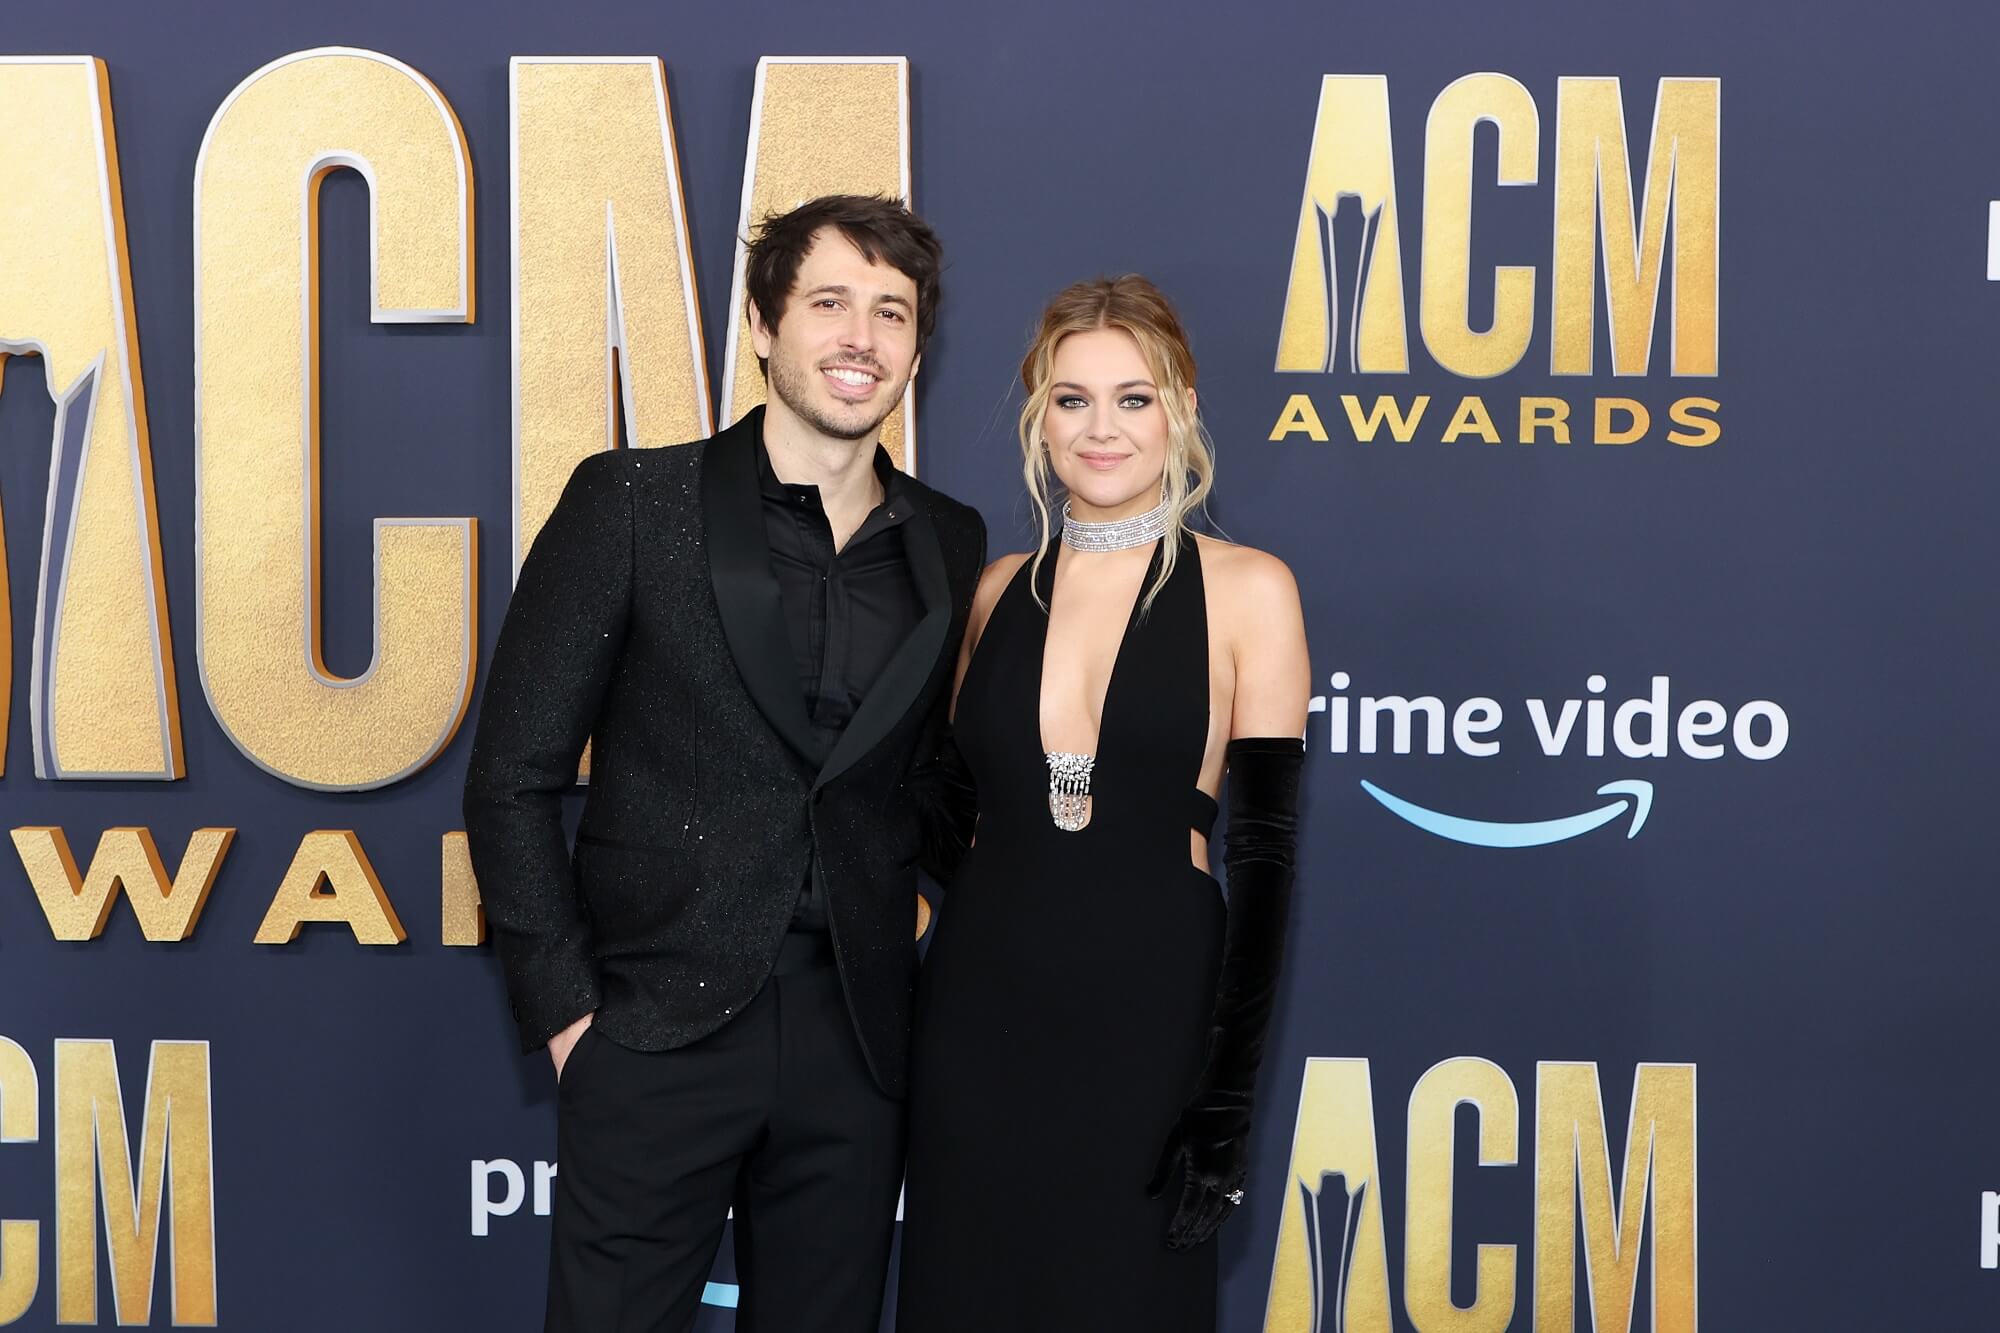 Morgan Evans and Kelsea Ballerini in black outfits in front of a backdrop reading 'ACM Awards'